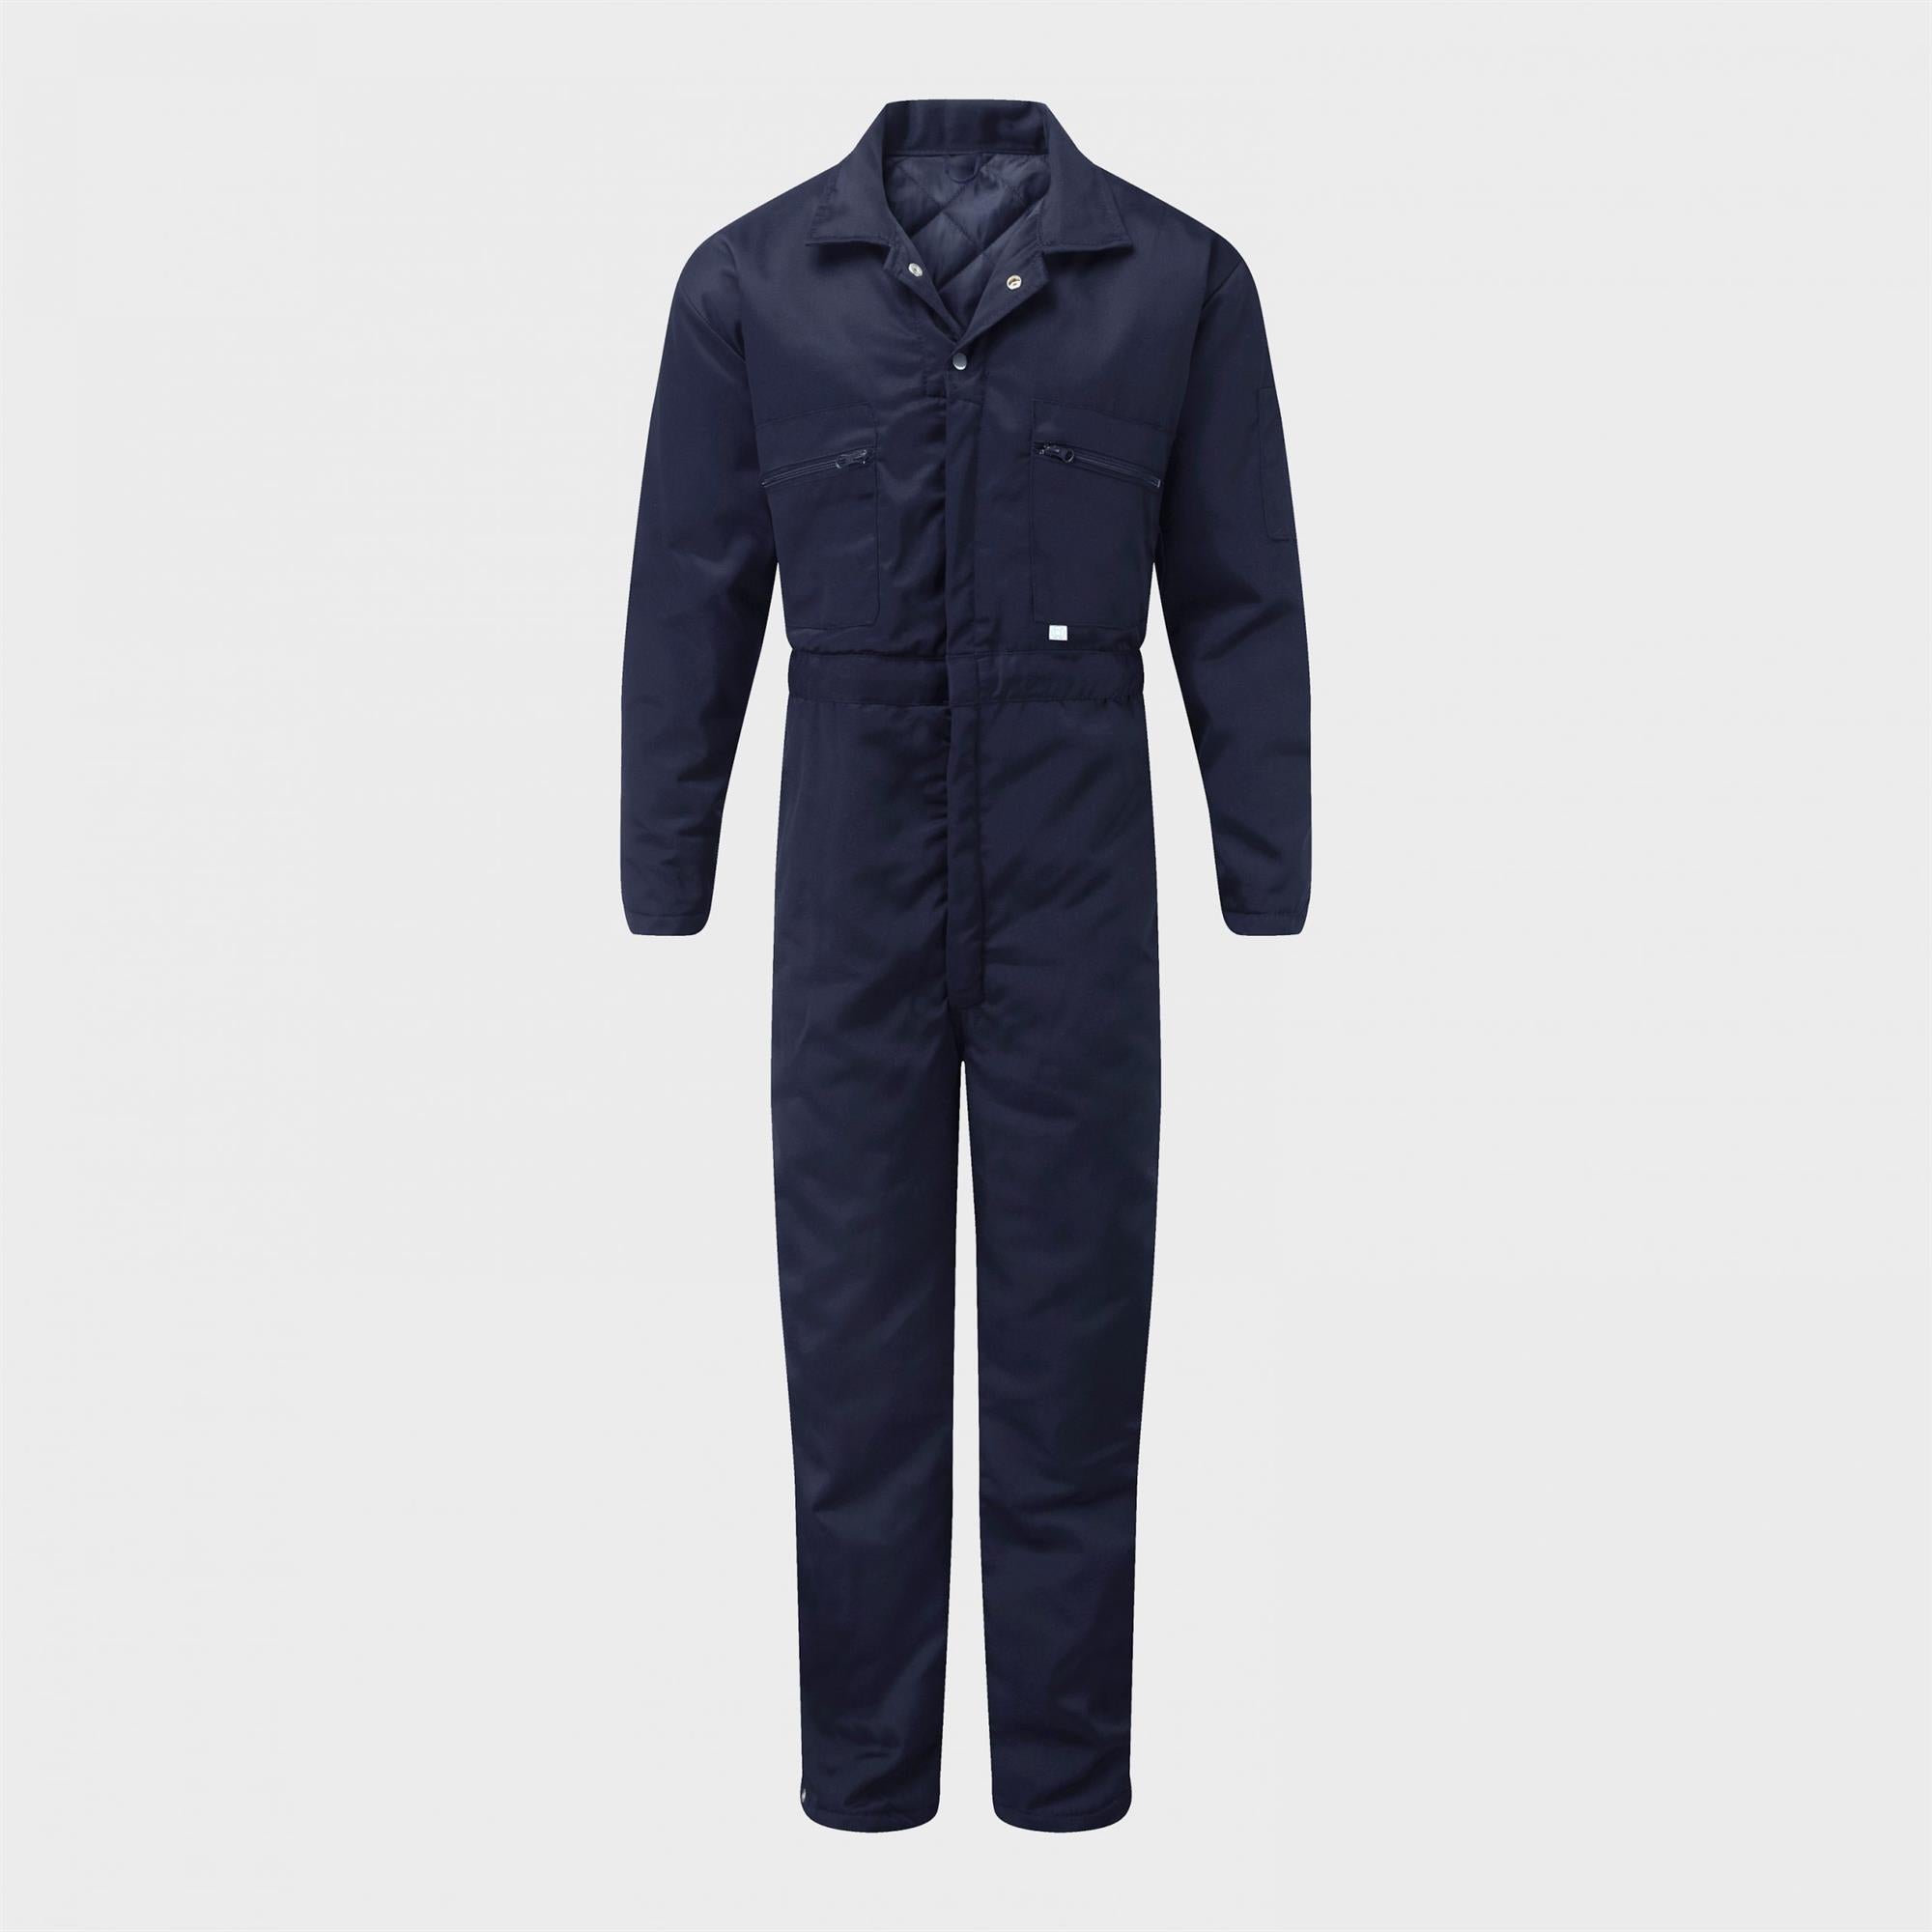 Fort quilted padded thermal warm-lined coverall winter work boilersuit #377